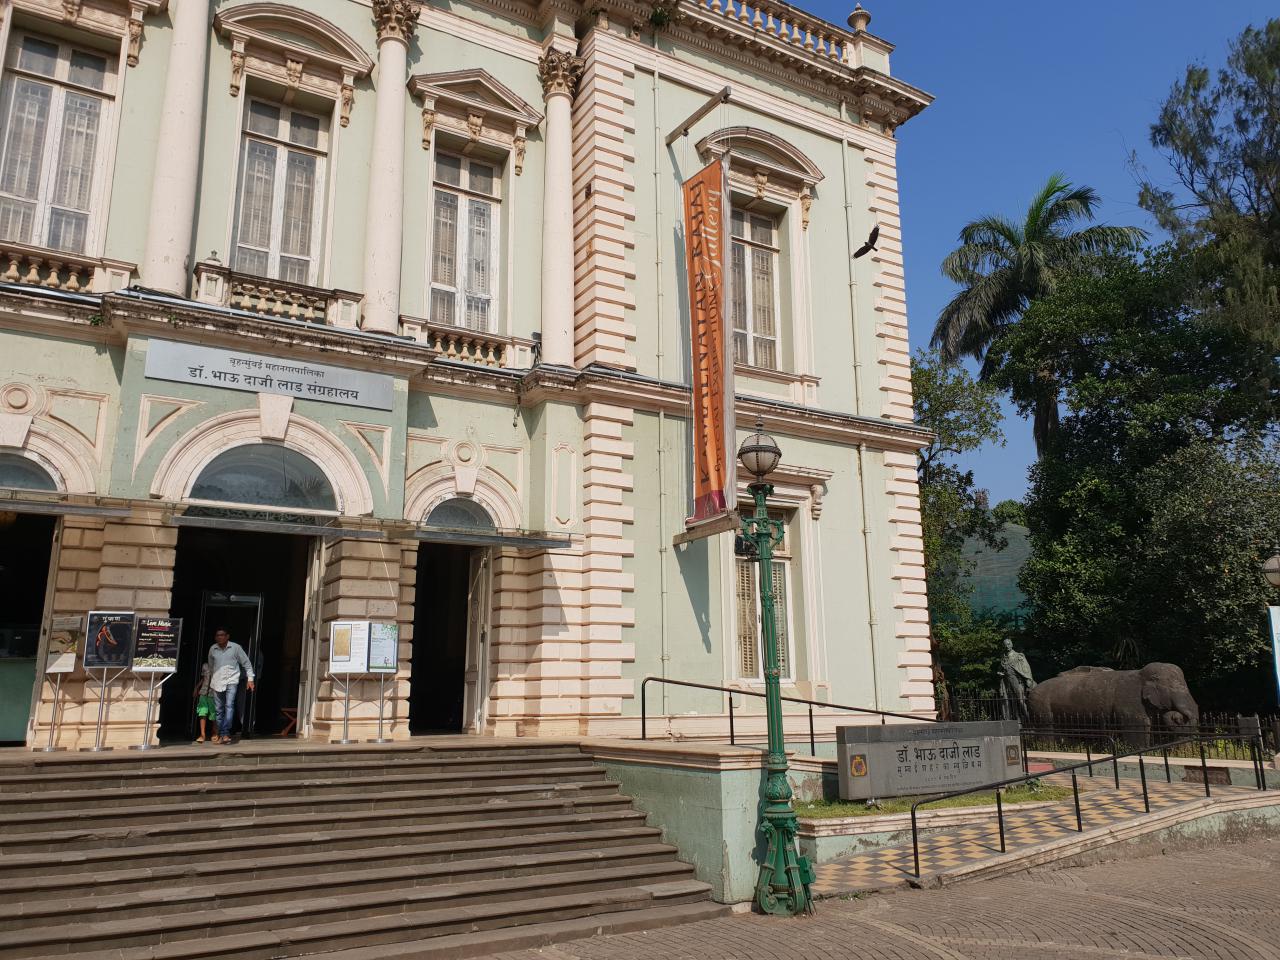 The Picture shows the entrance of the Dr. Bhau Daji Lad Museum in Mumbai